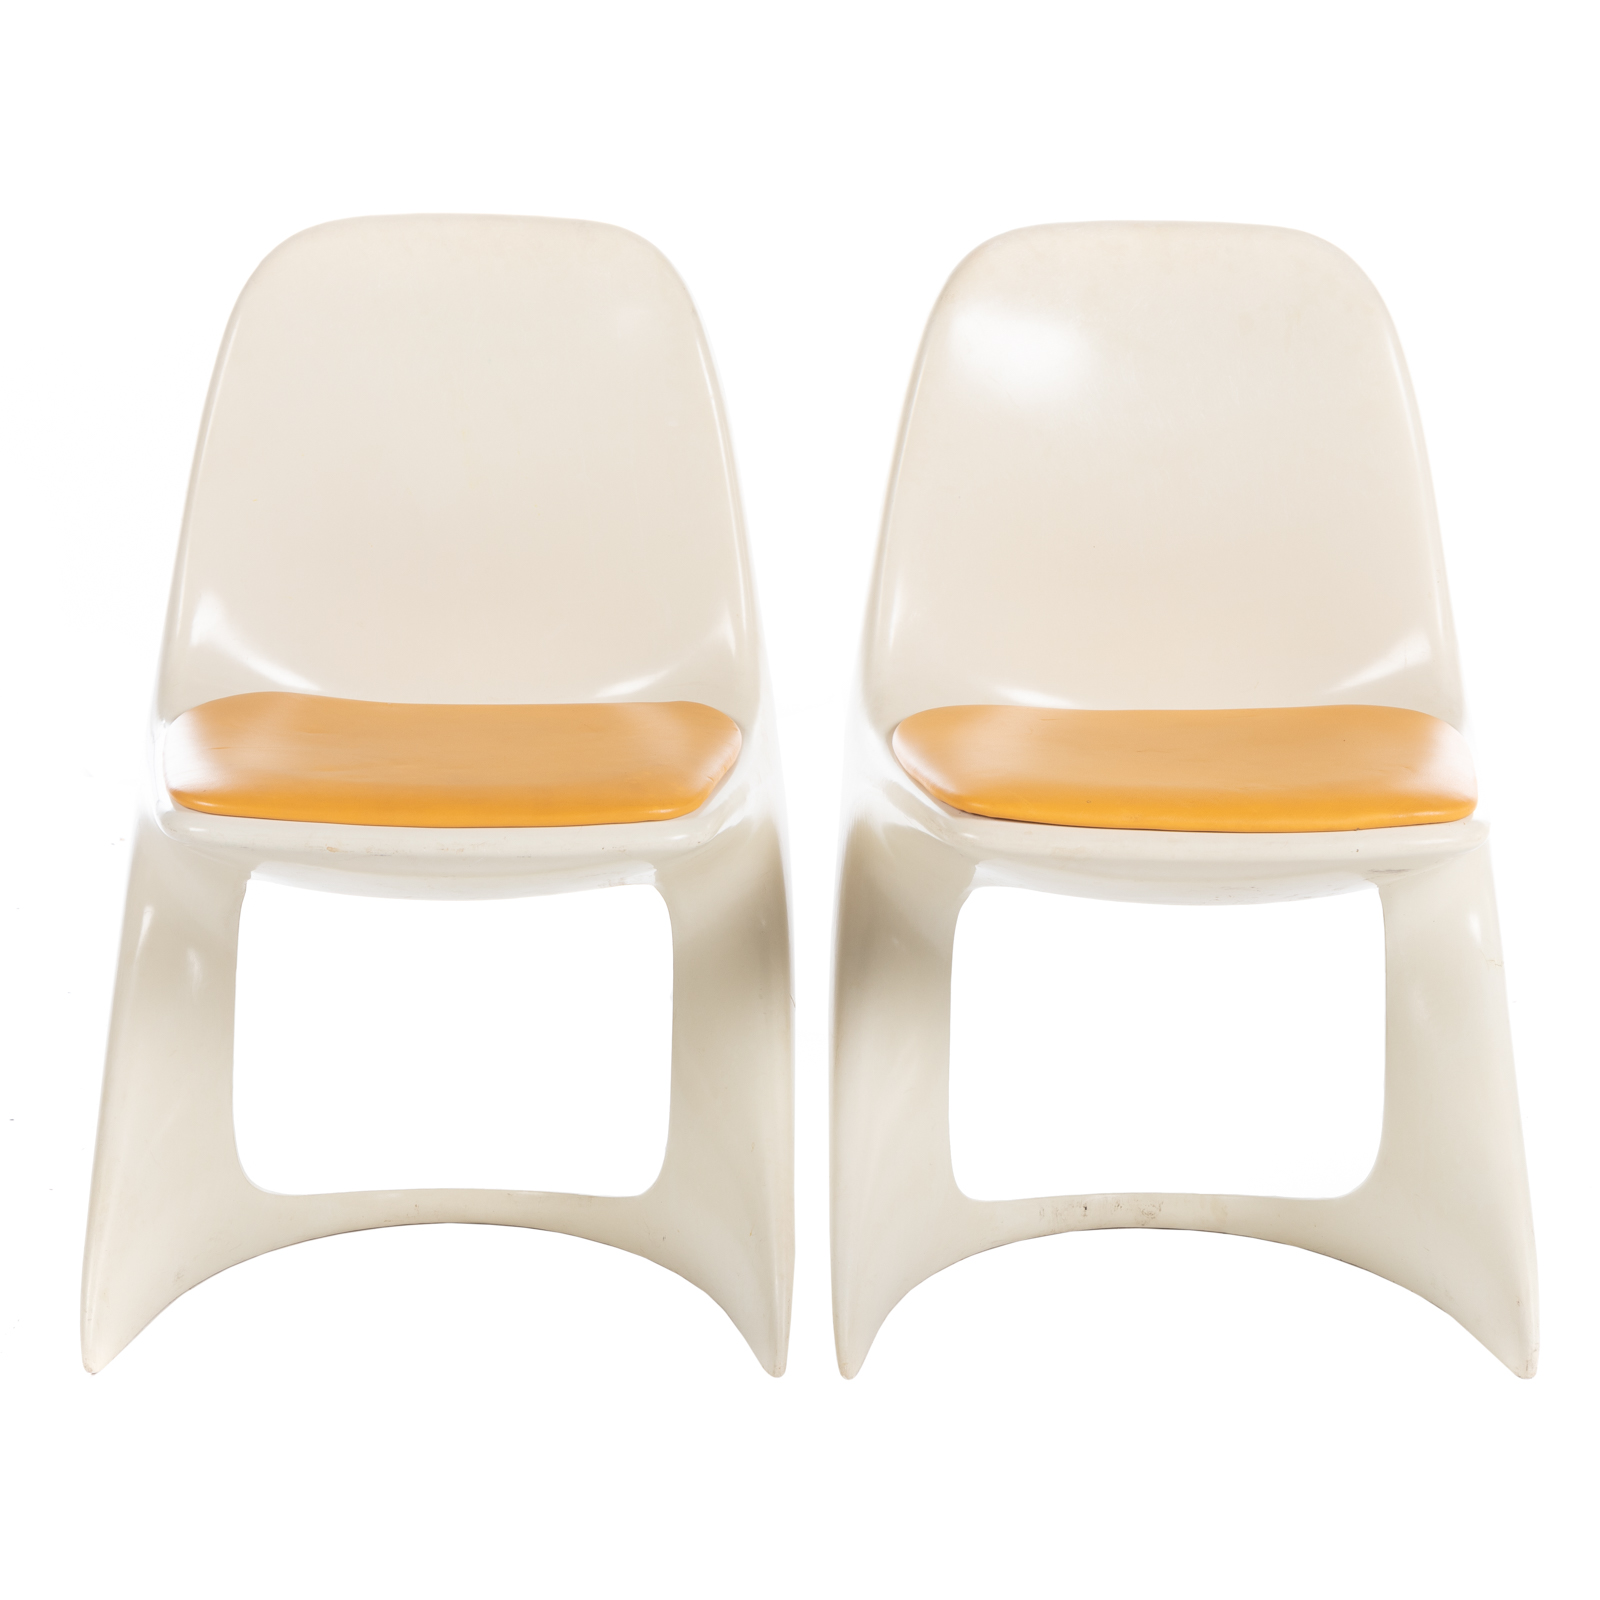 A PAIR OF MODERN CHAIRS BY ALEXANDER 369e98